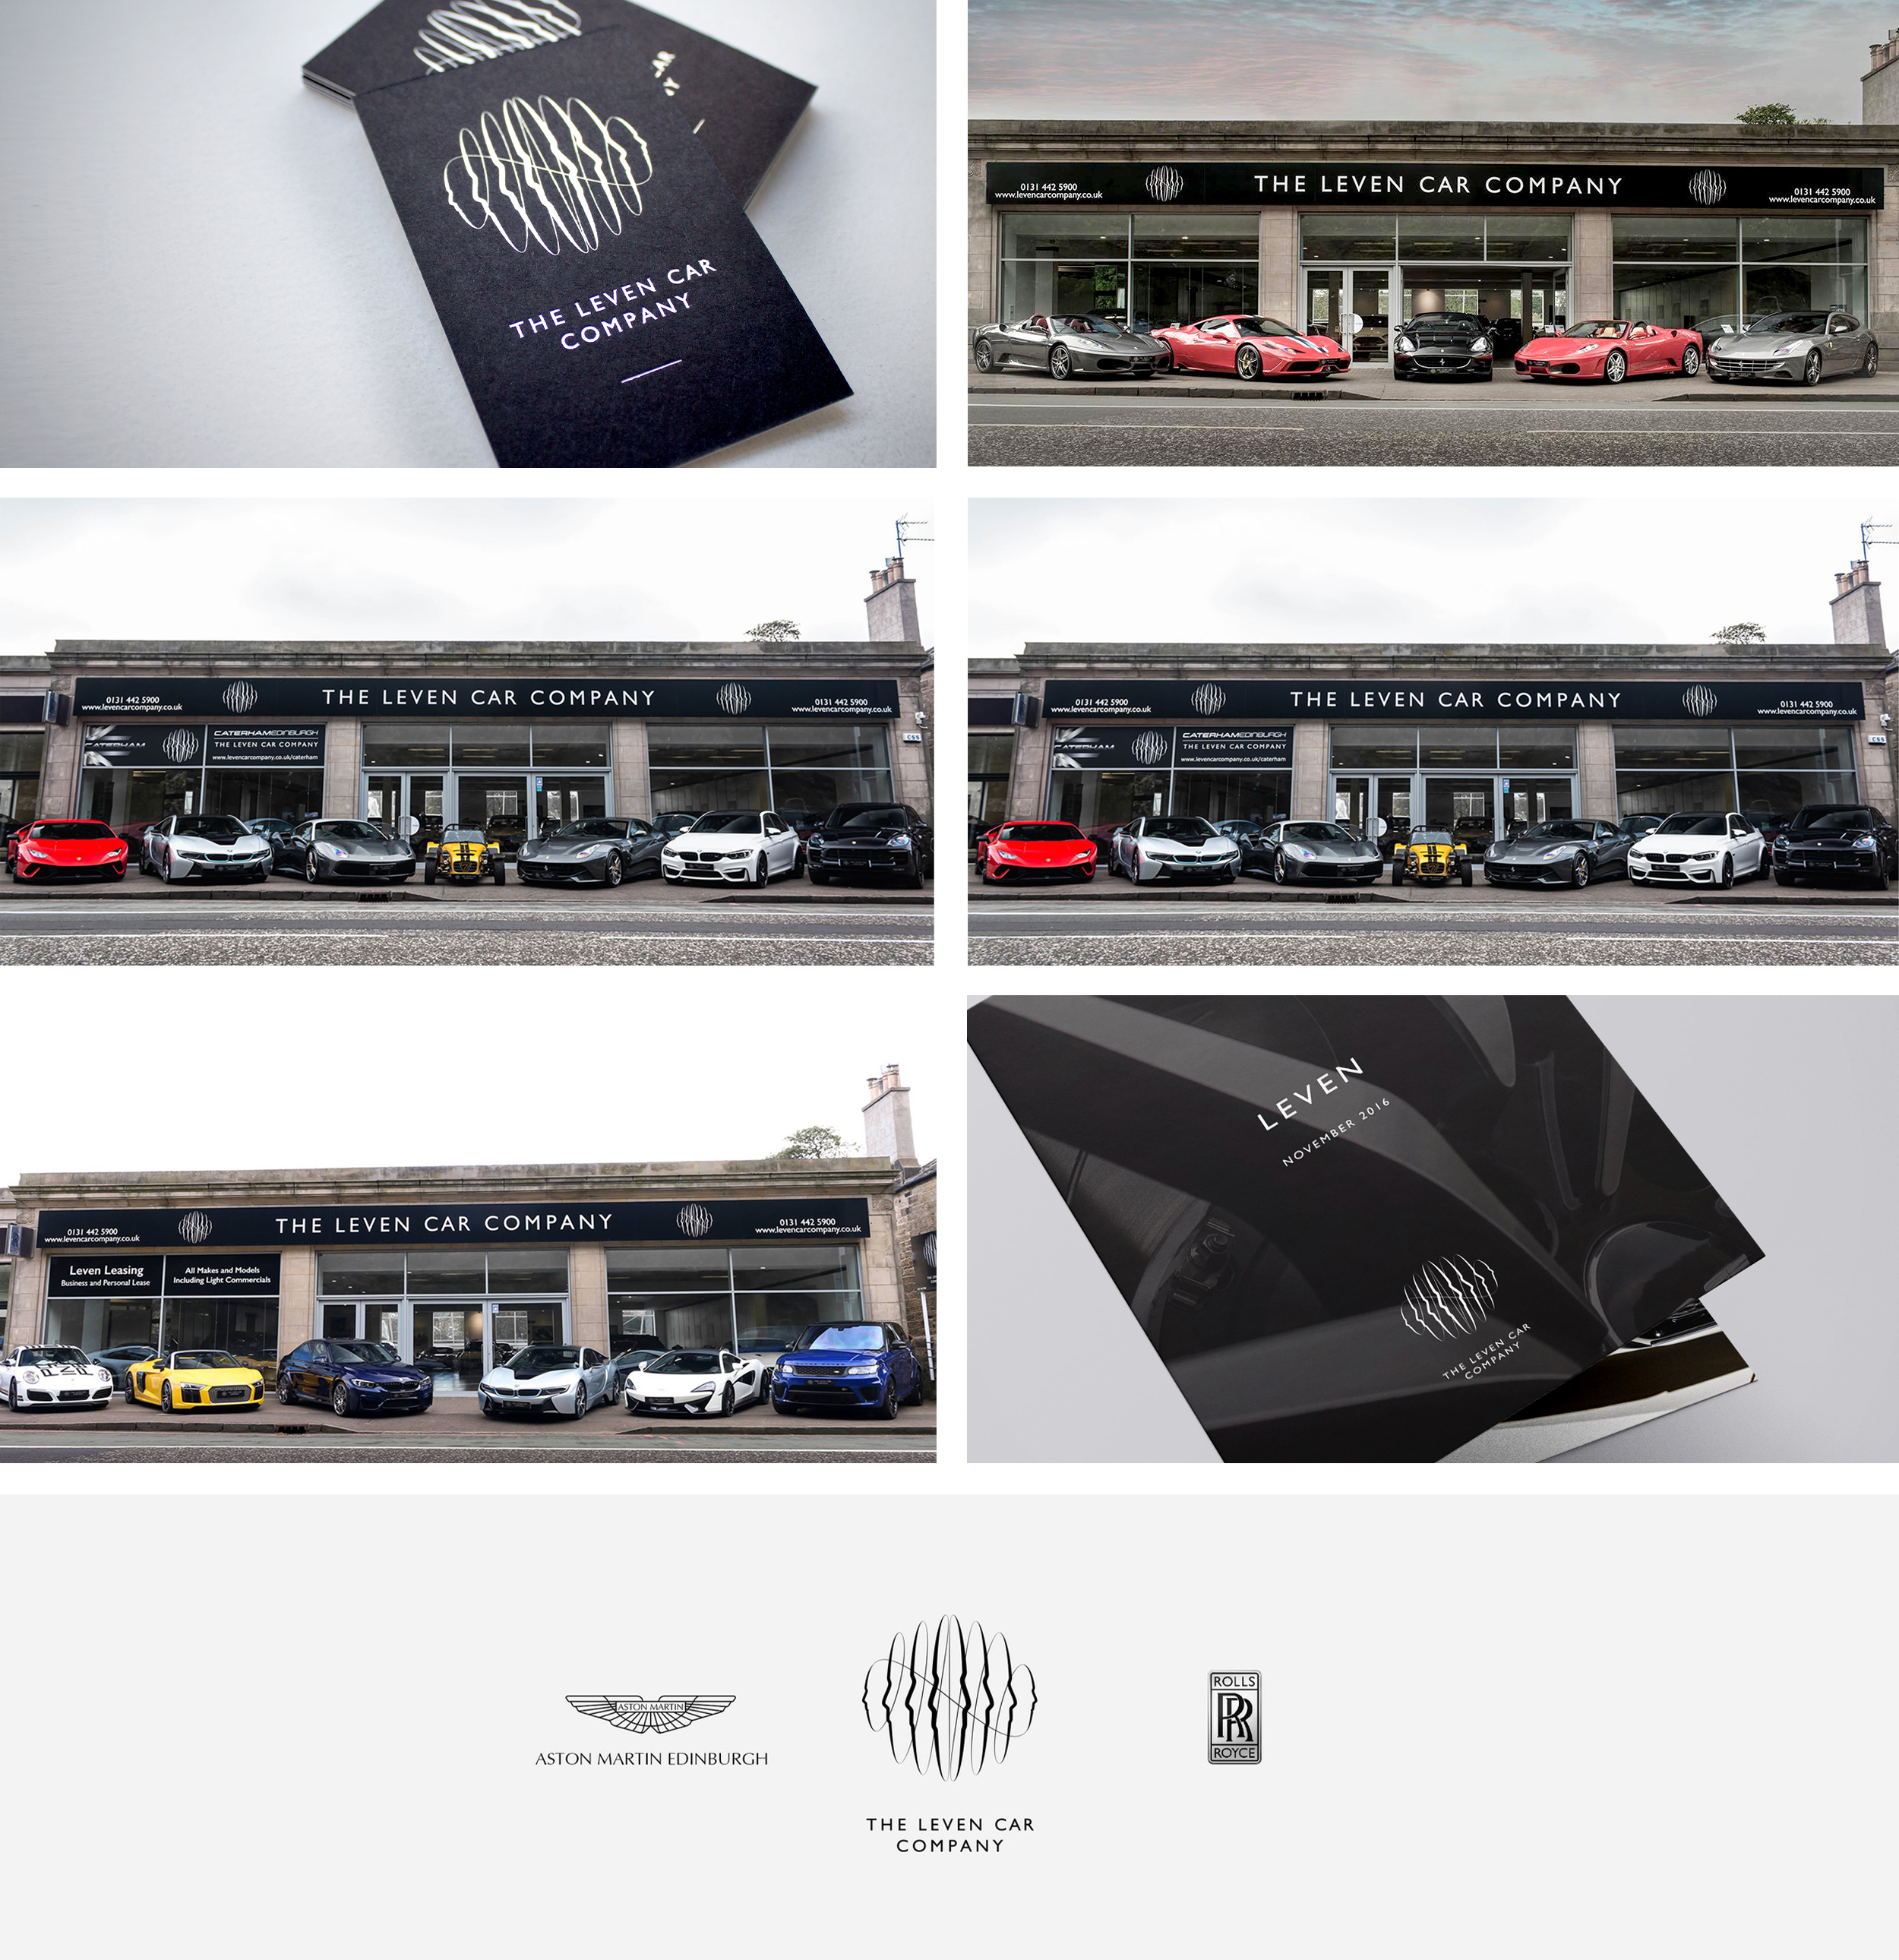 The-Leven-Car-Company-Brand-Activation-Banner-Showroom-Various-Print-Images